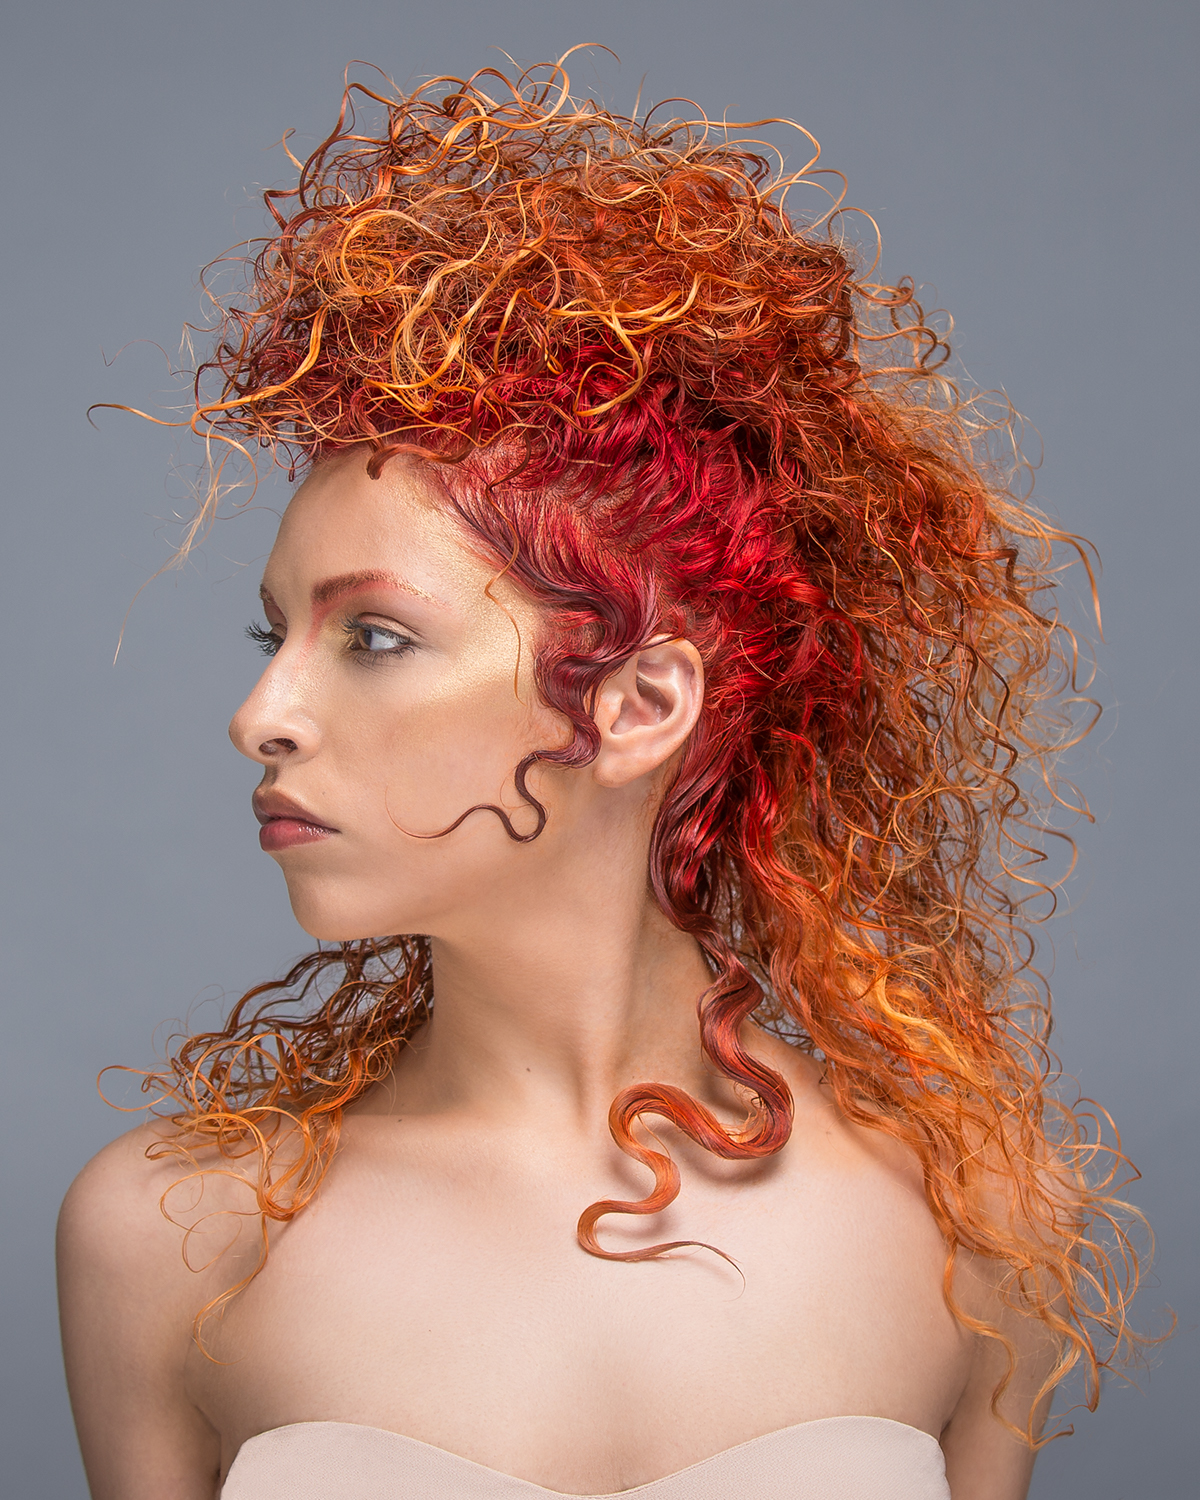 Wella 2016 Hairstyle Competition-Headroom , Paradise on Behance